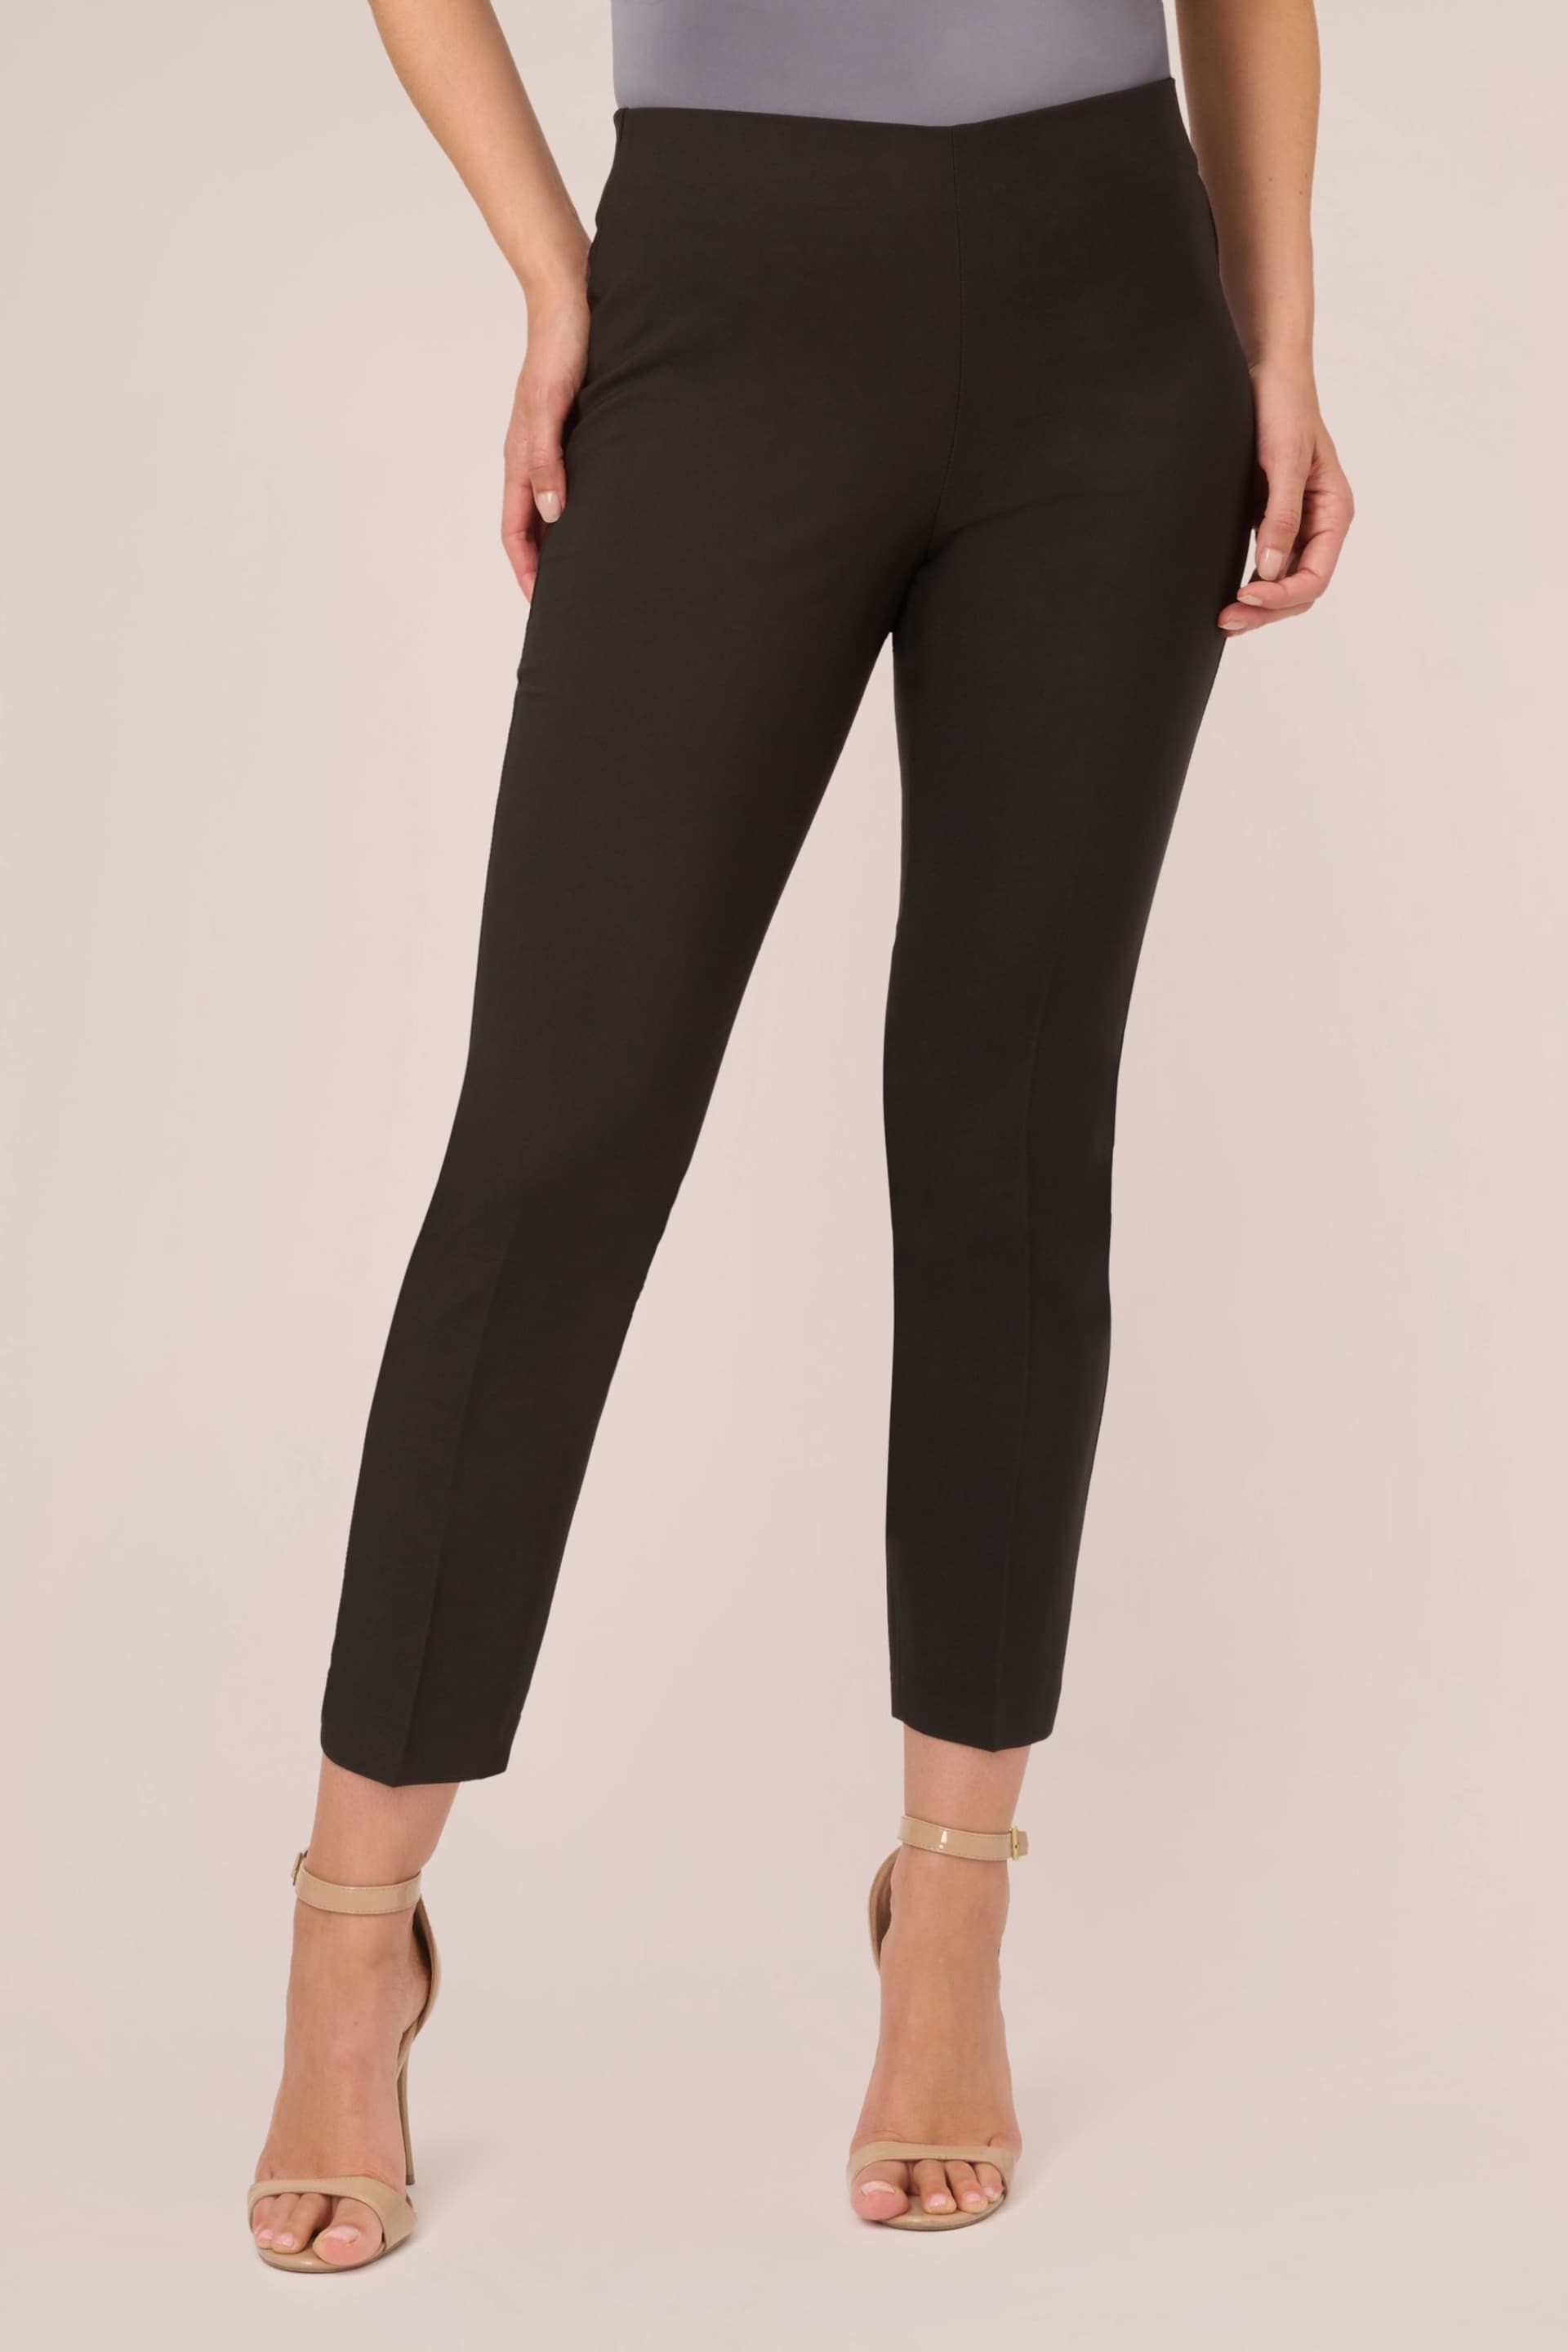 Adrianna Papell Solid Bi-Stretch Pull-On Black Trousers - Image 1 of 6